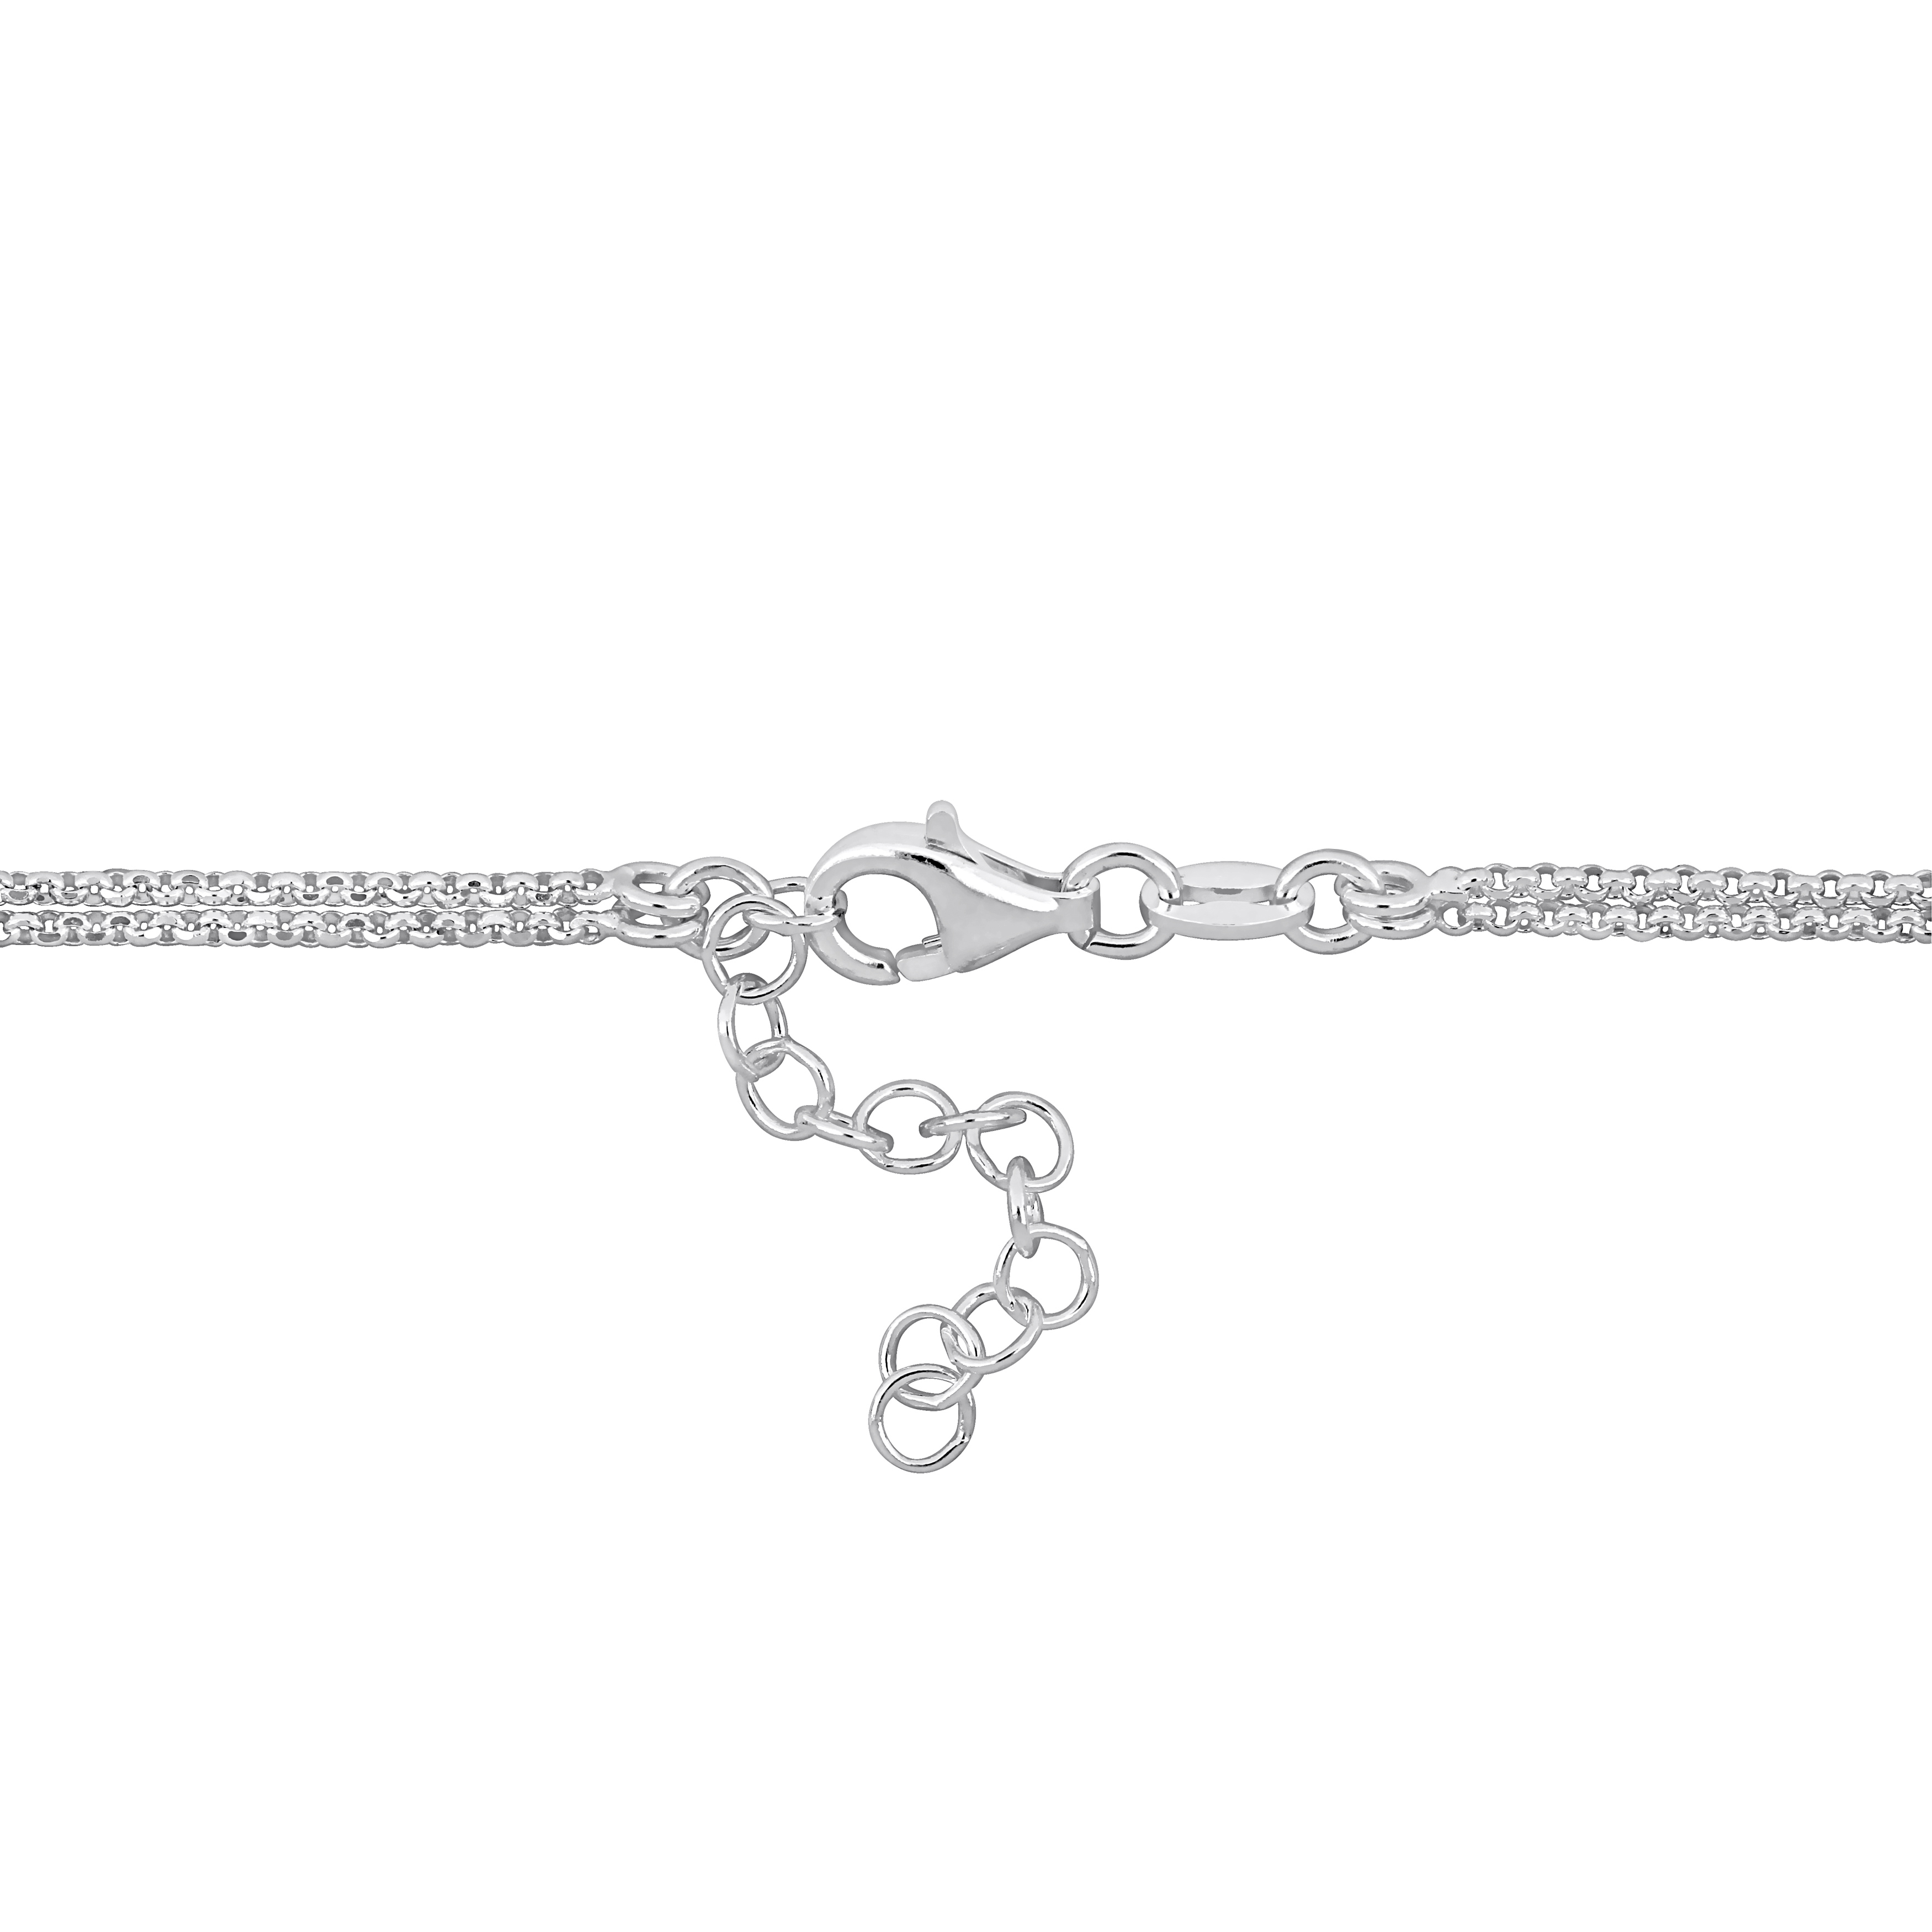 Infinity and Heart Charm Double Strand Necklace in Sterling Silver - 16+18+1 in.